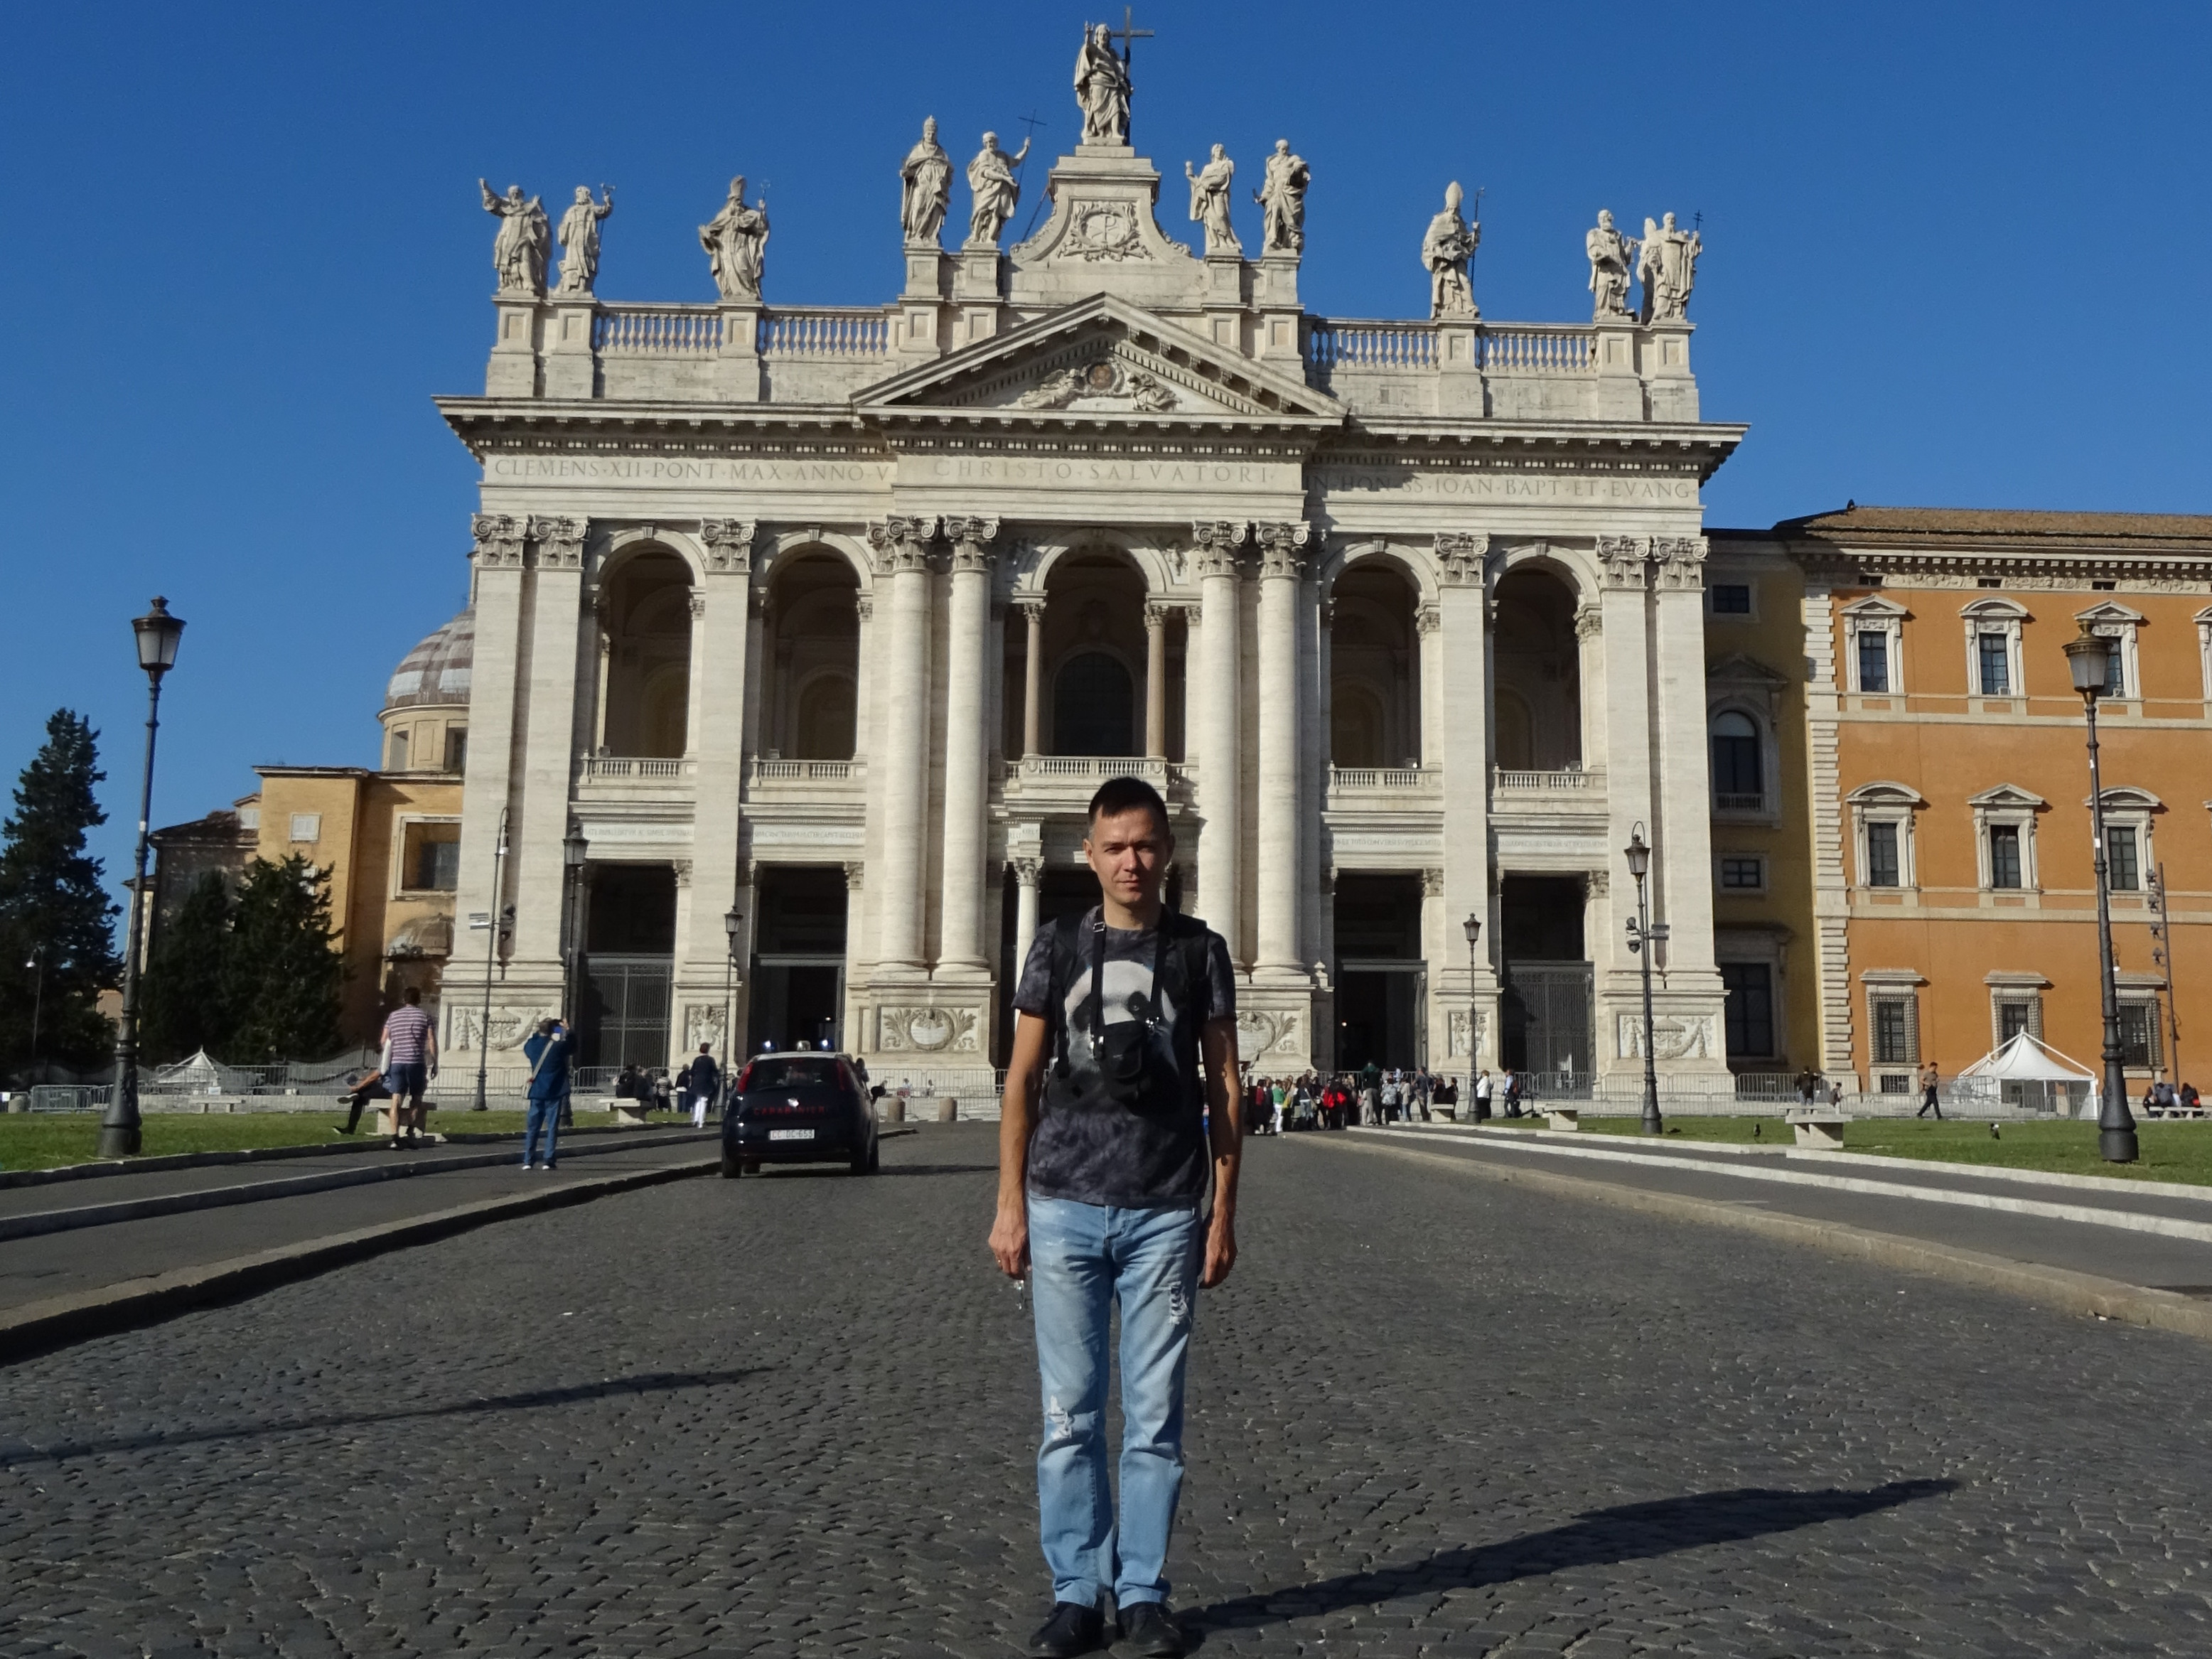 2019.10.05 In front of the Cathedral of Saint John the Baptist in the Lateran (Basilica di San Giovanni in Laterano), one of the 4 major/papal basilicas of Rome, with the the cathedra of the Roman bishop and the Papal throne.